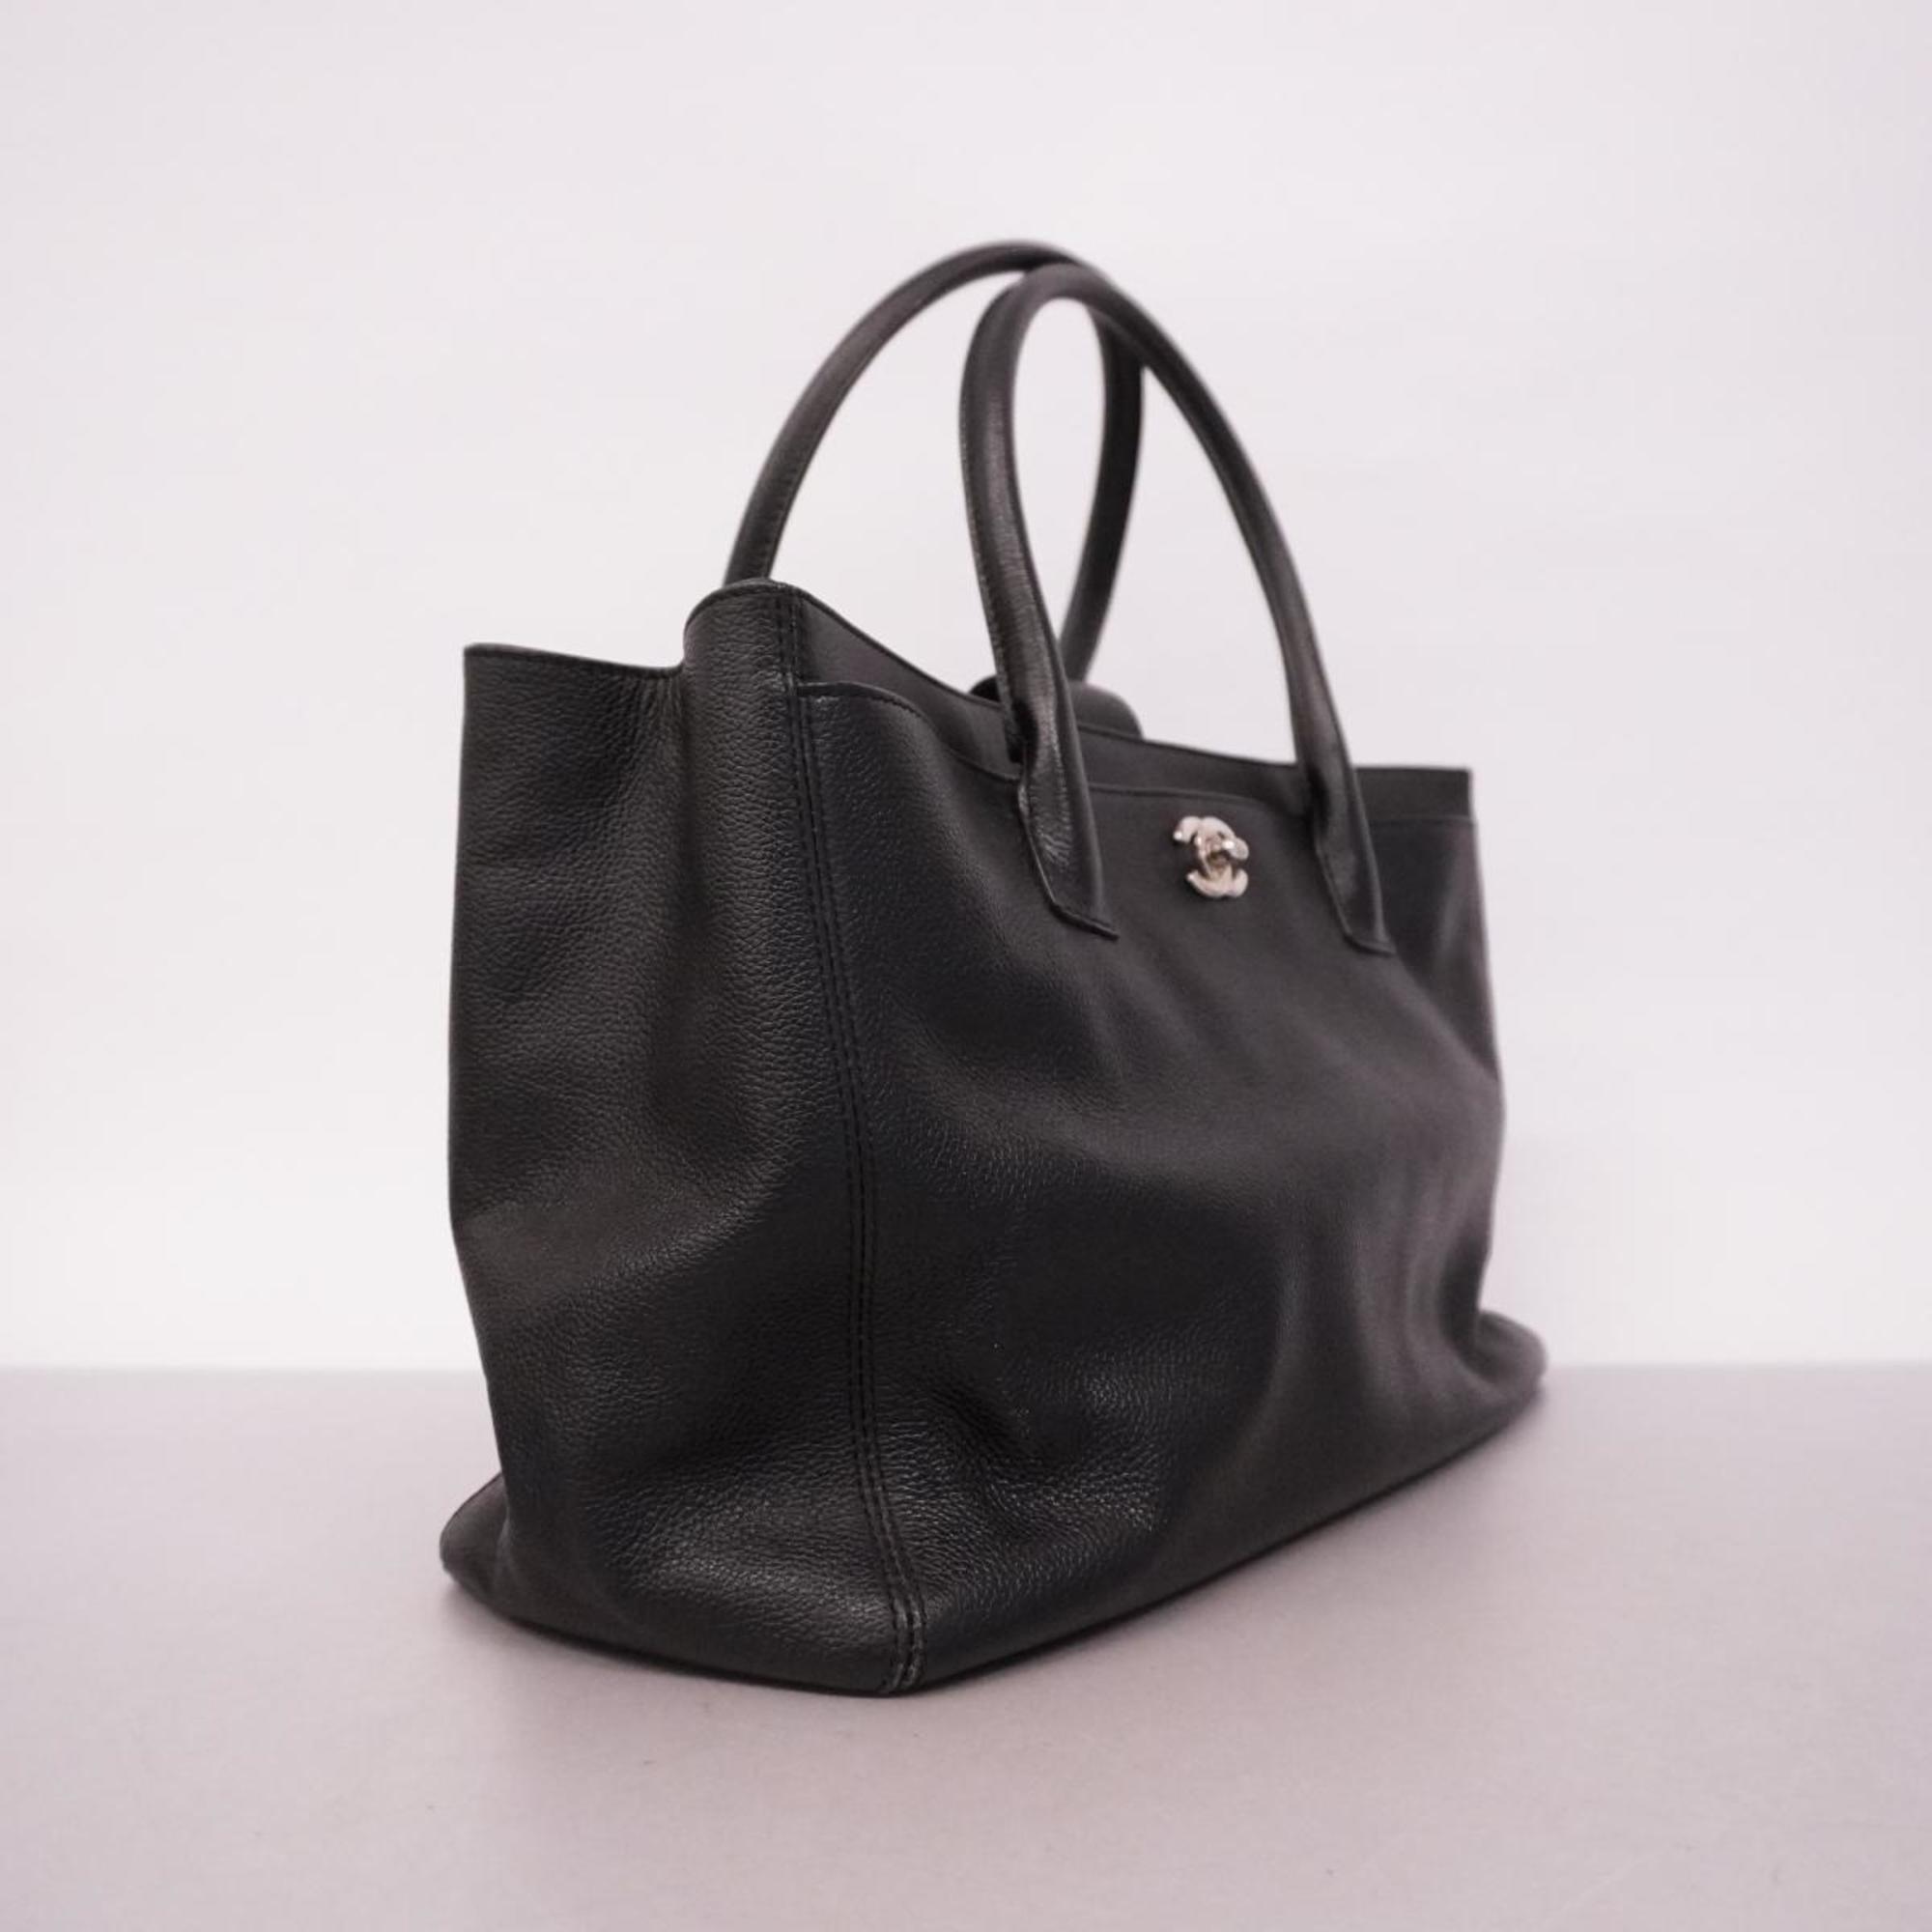 Chanel Tote Bag Executive Leather Black Women's